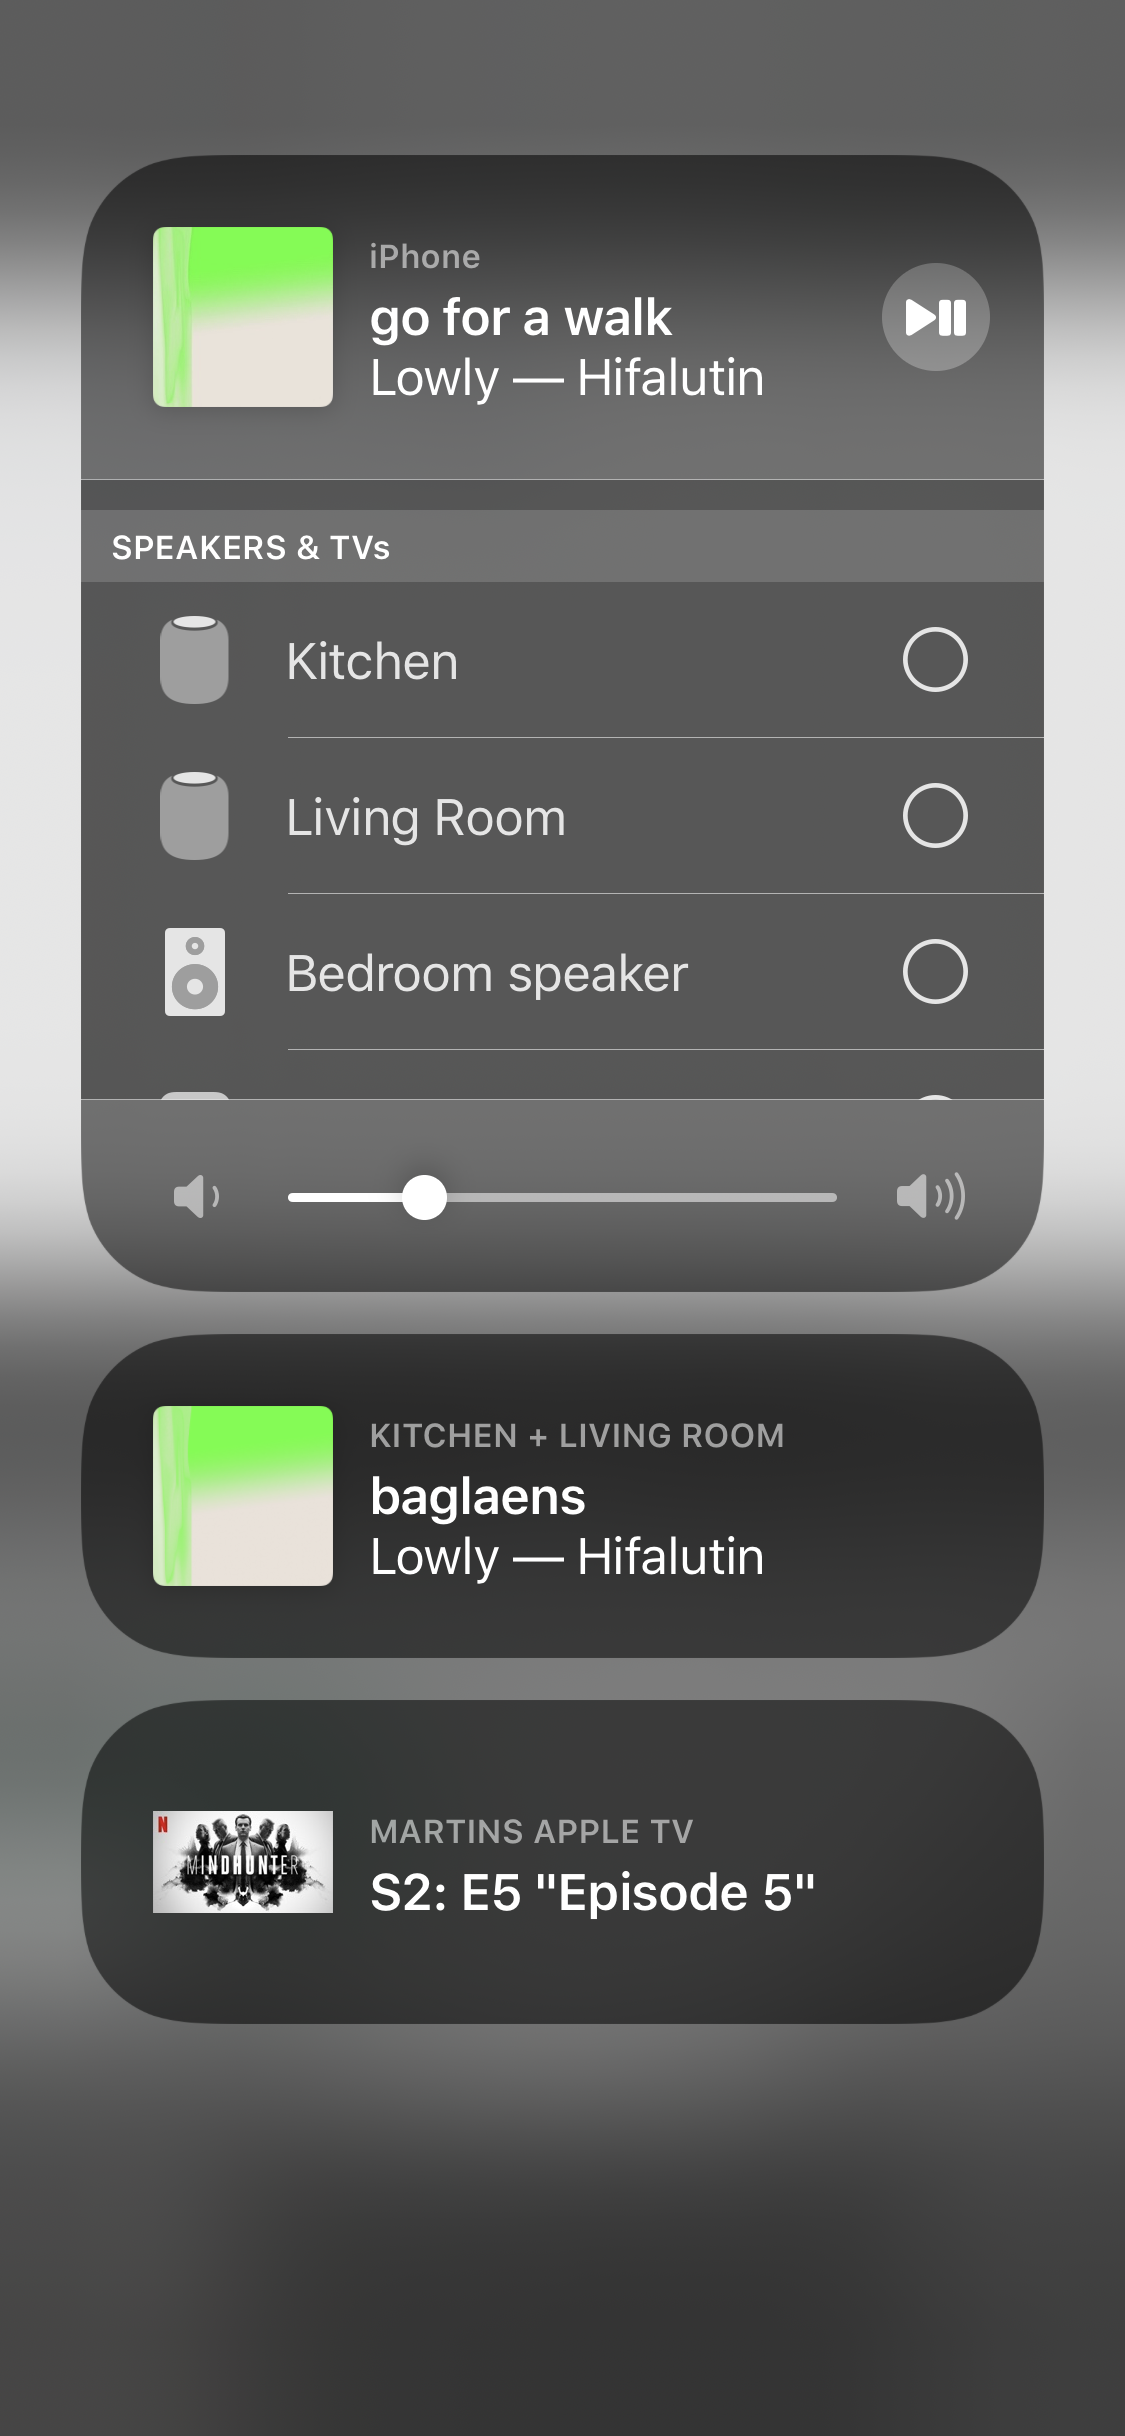 at retfærdiggøre afstemning Hvordan Sonos IKEA Bookshelf doesn't have it's own section in Control Center  although it supports AirPlay 2 | Sonos Community